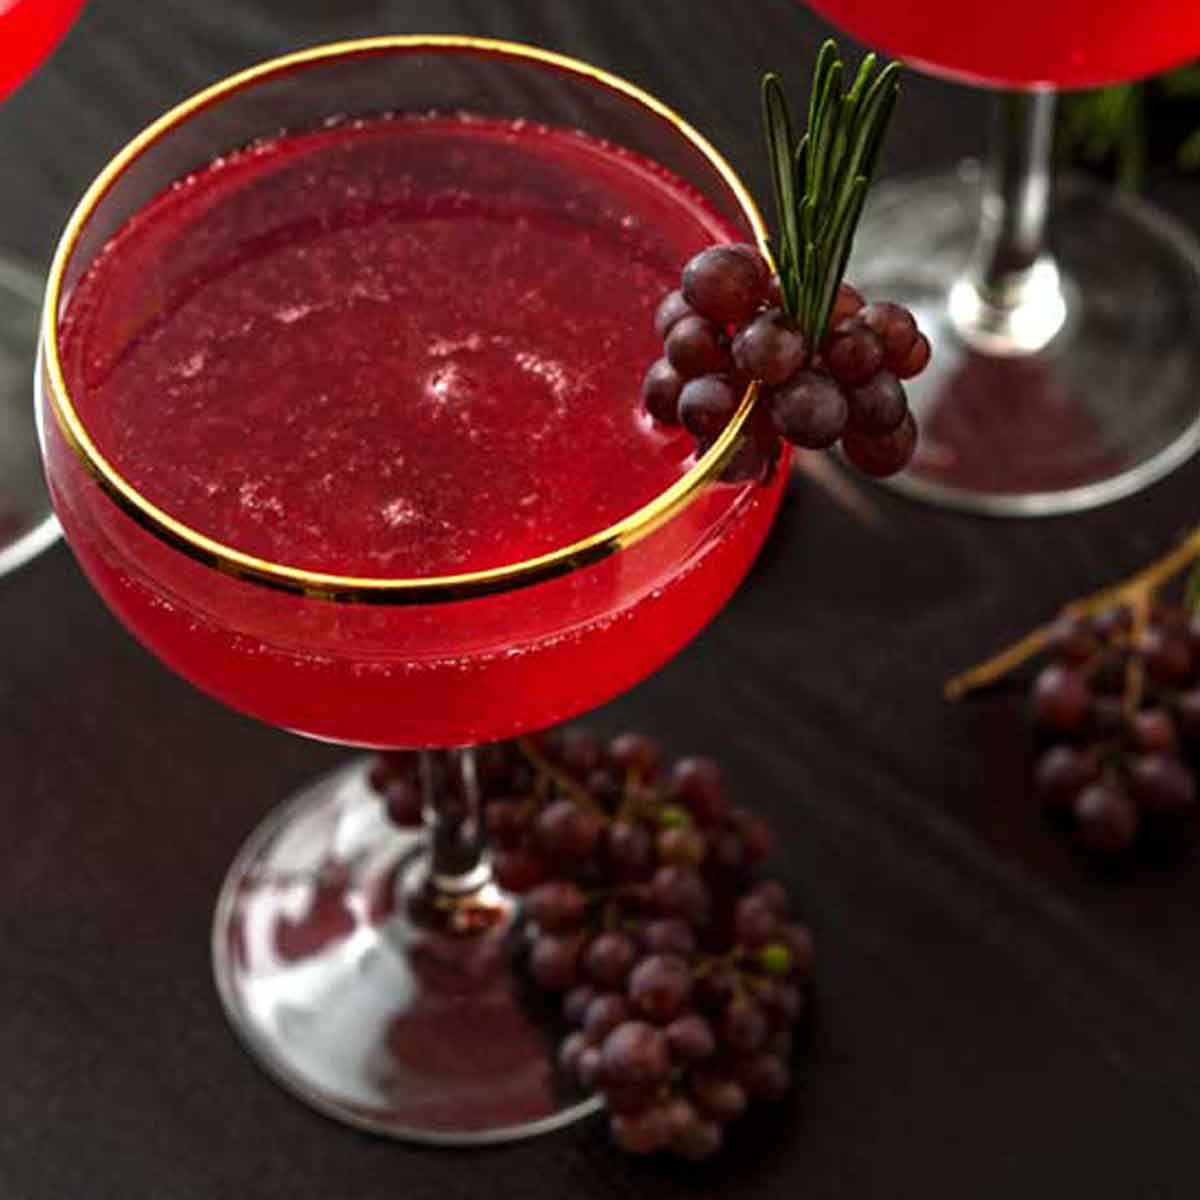 A cocktail garnished with small grapes and sprigs of rosemary.